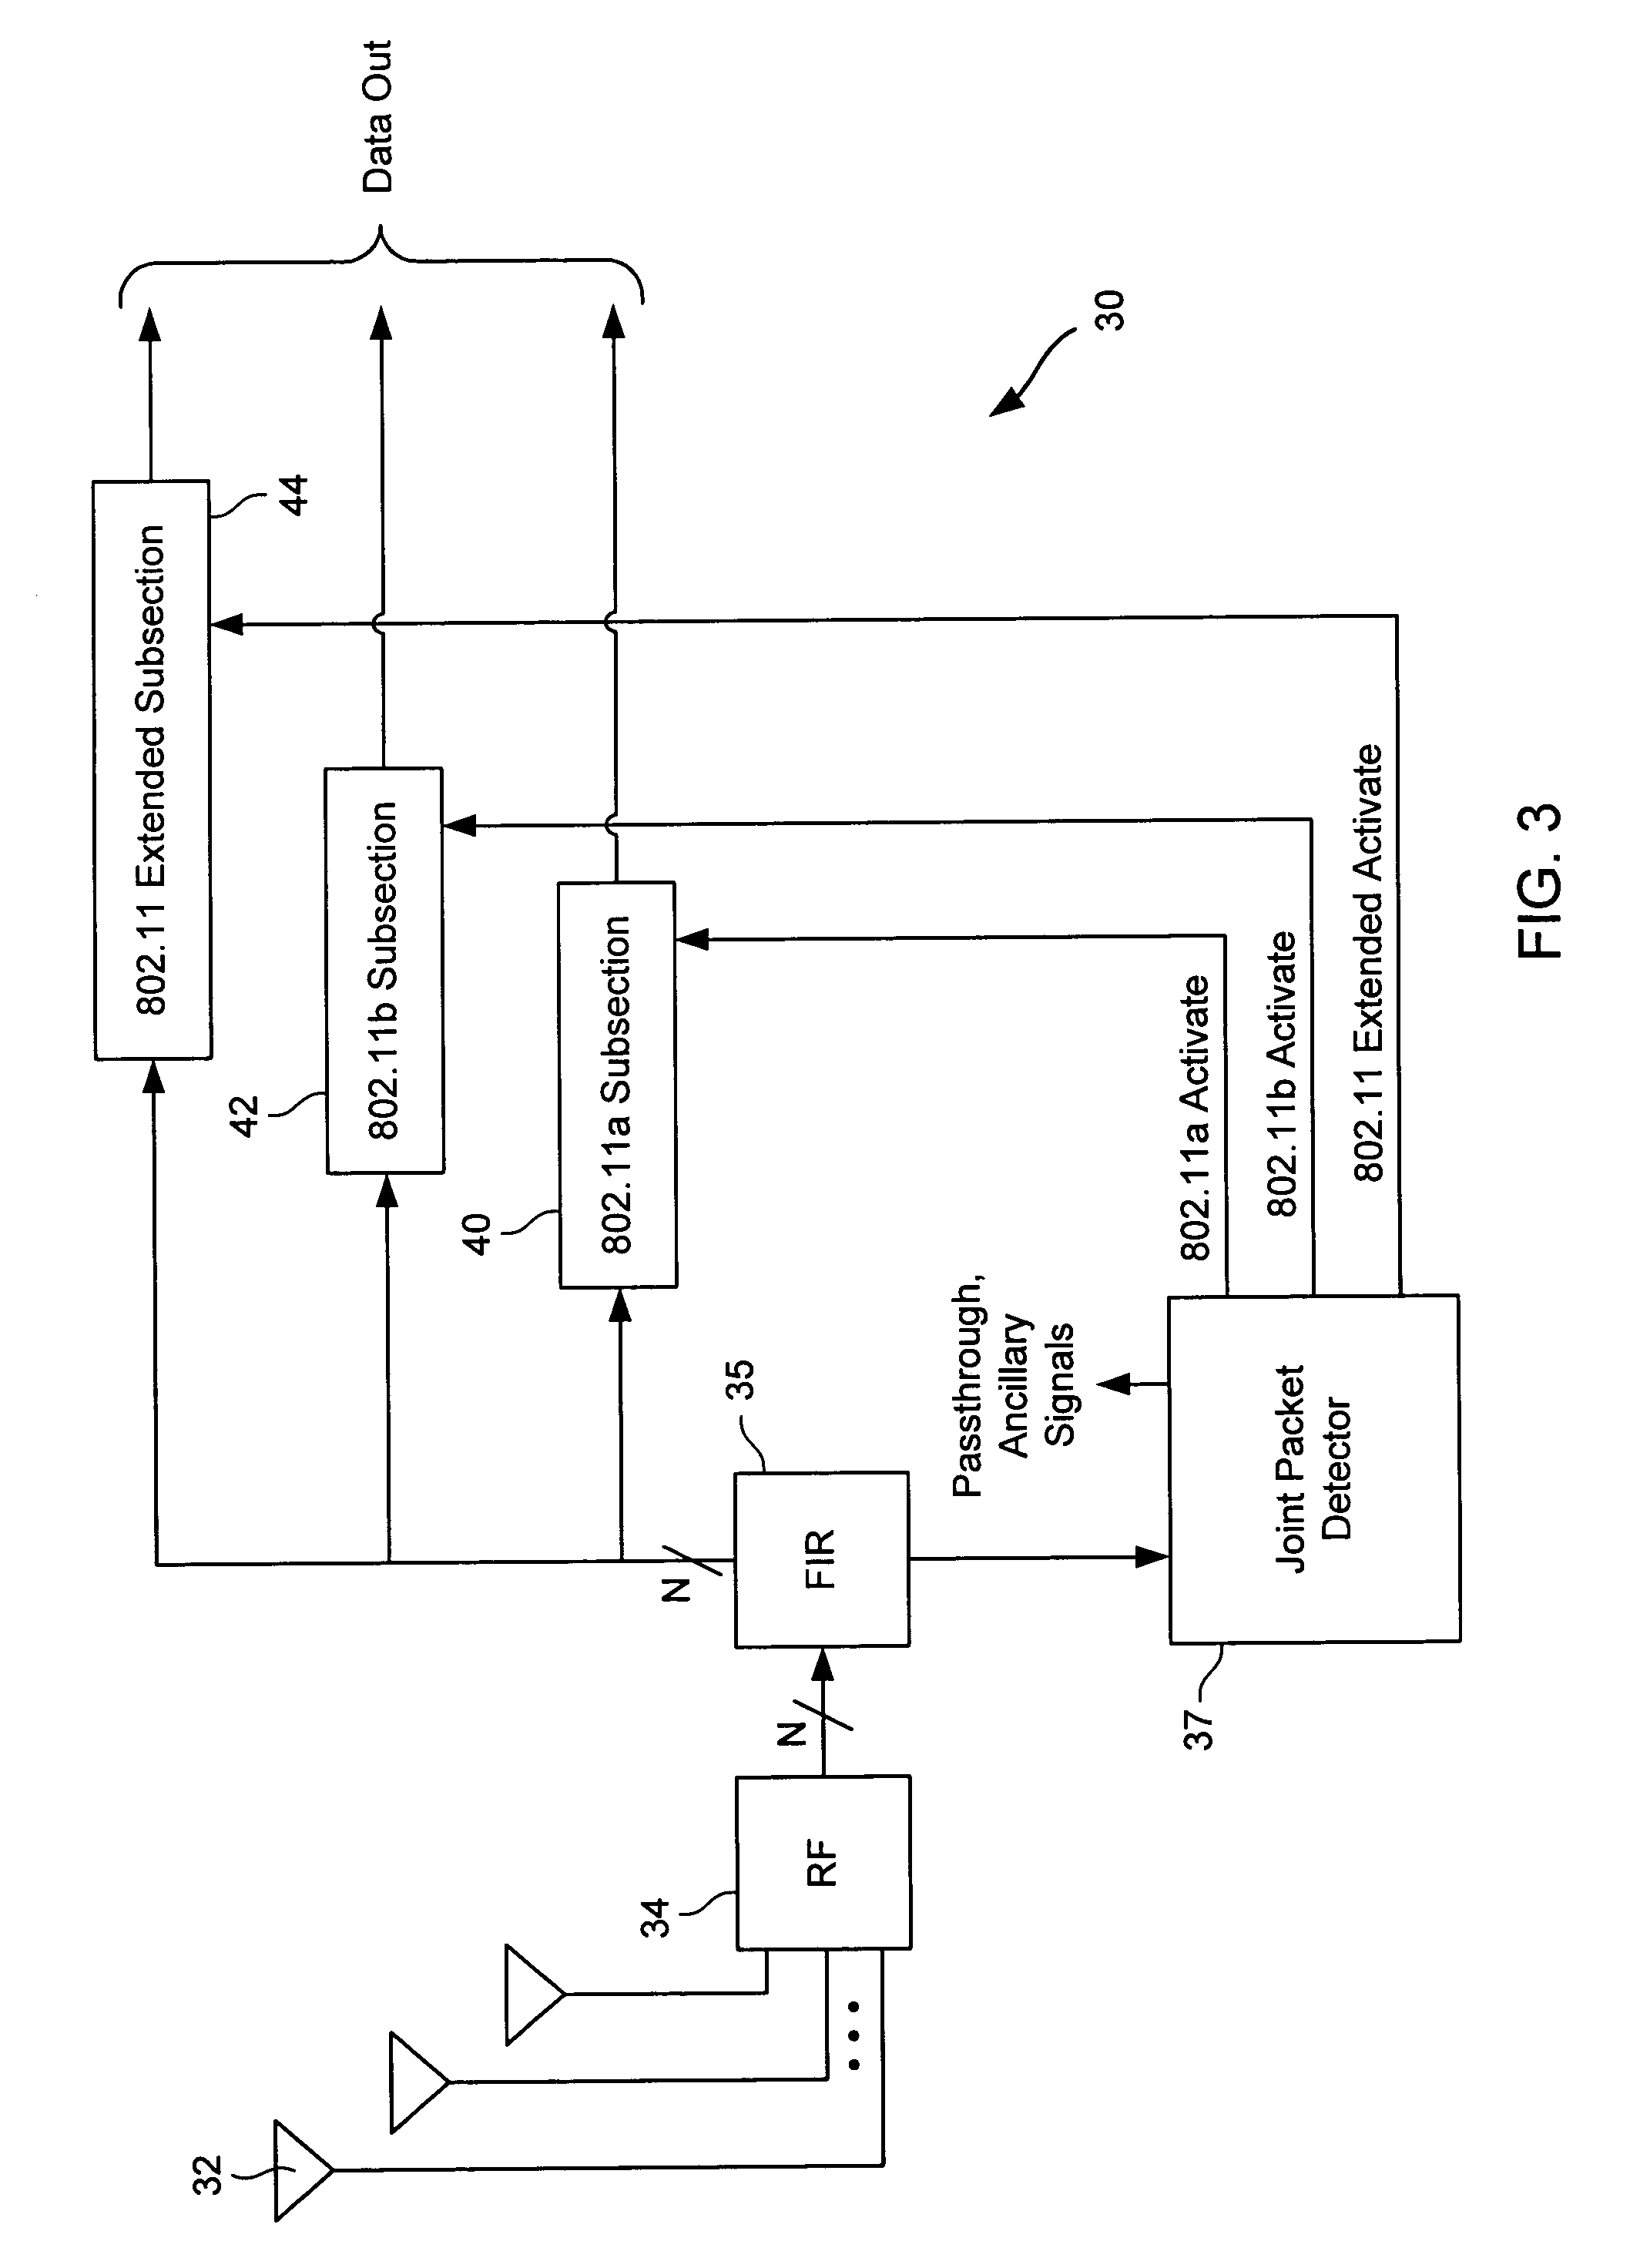 Joint packet detection in wireless communication system with one or more receiver